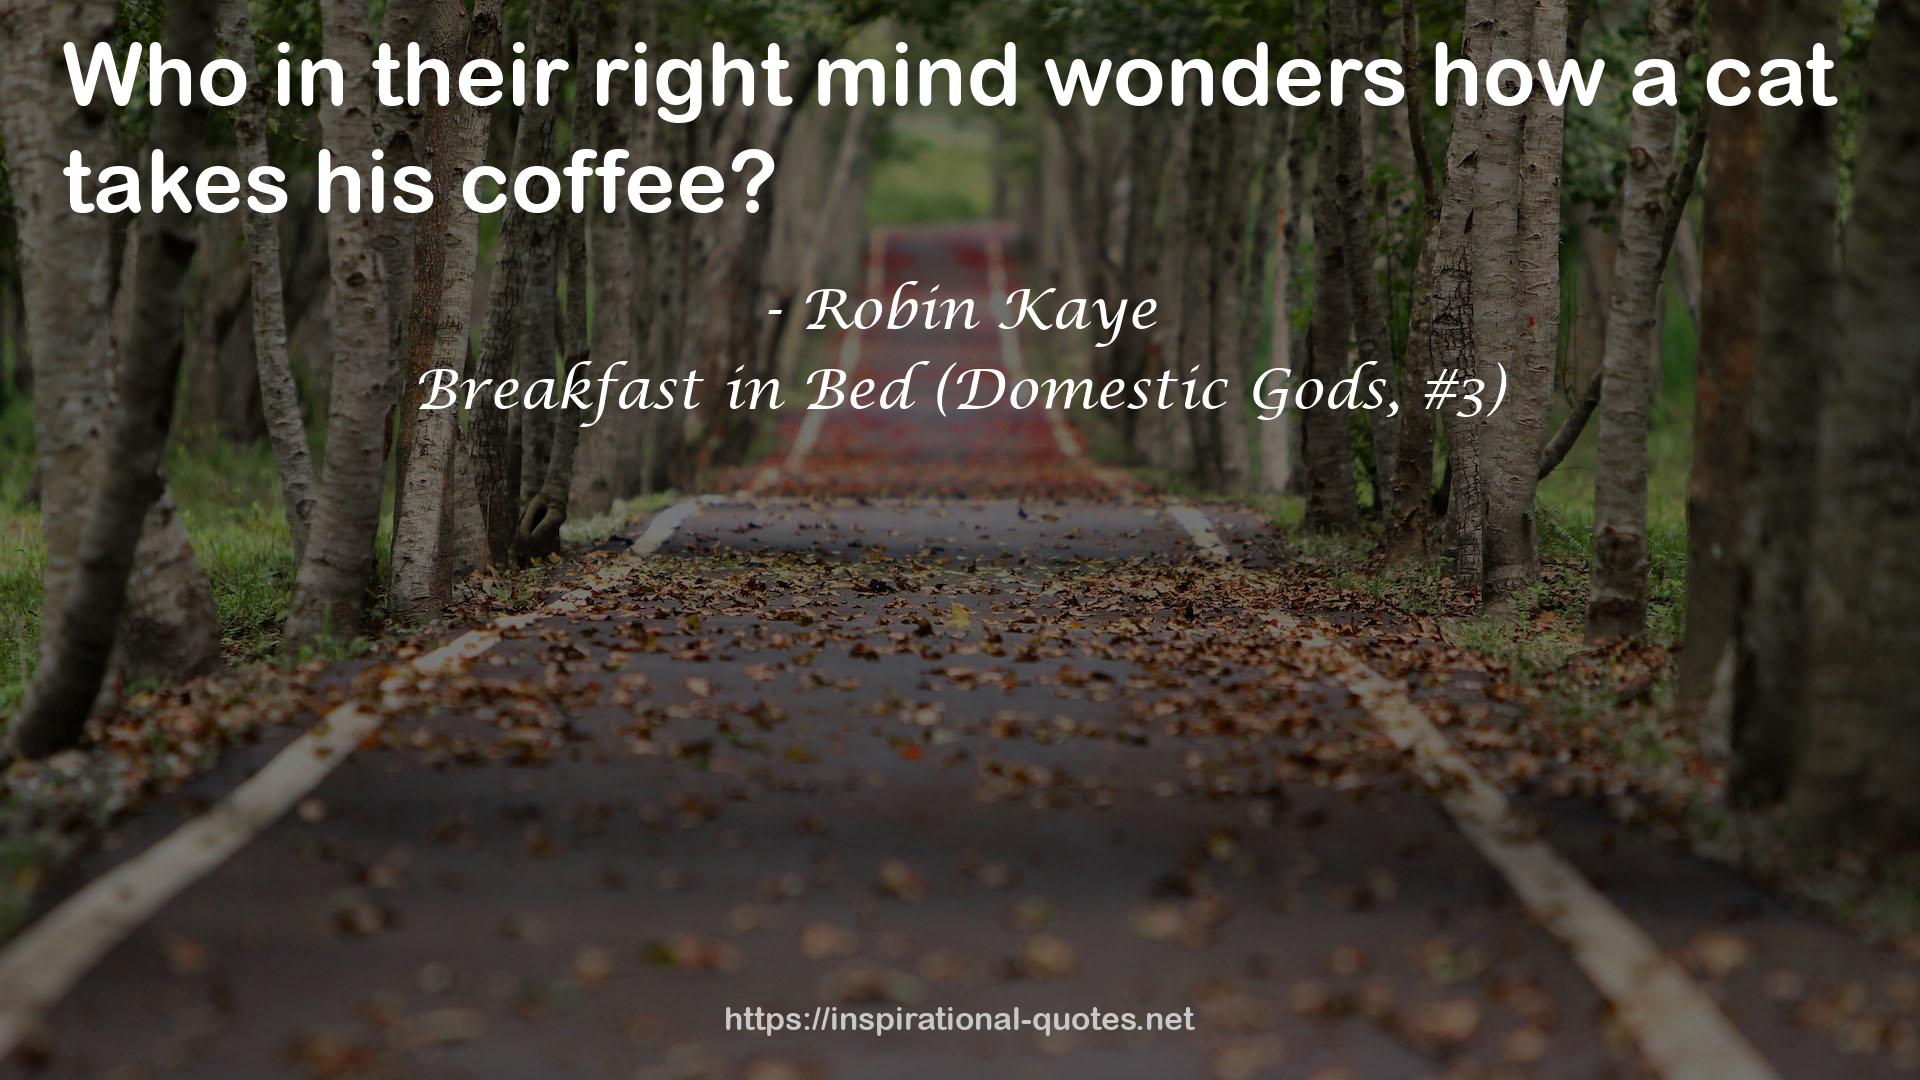 Breakfast in Bed (Domestic Gods, #3) QUOTES